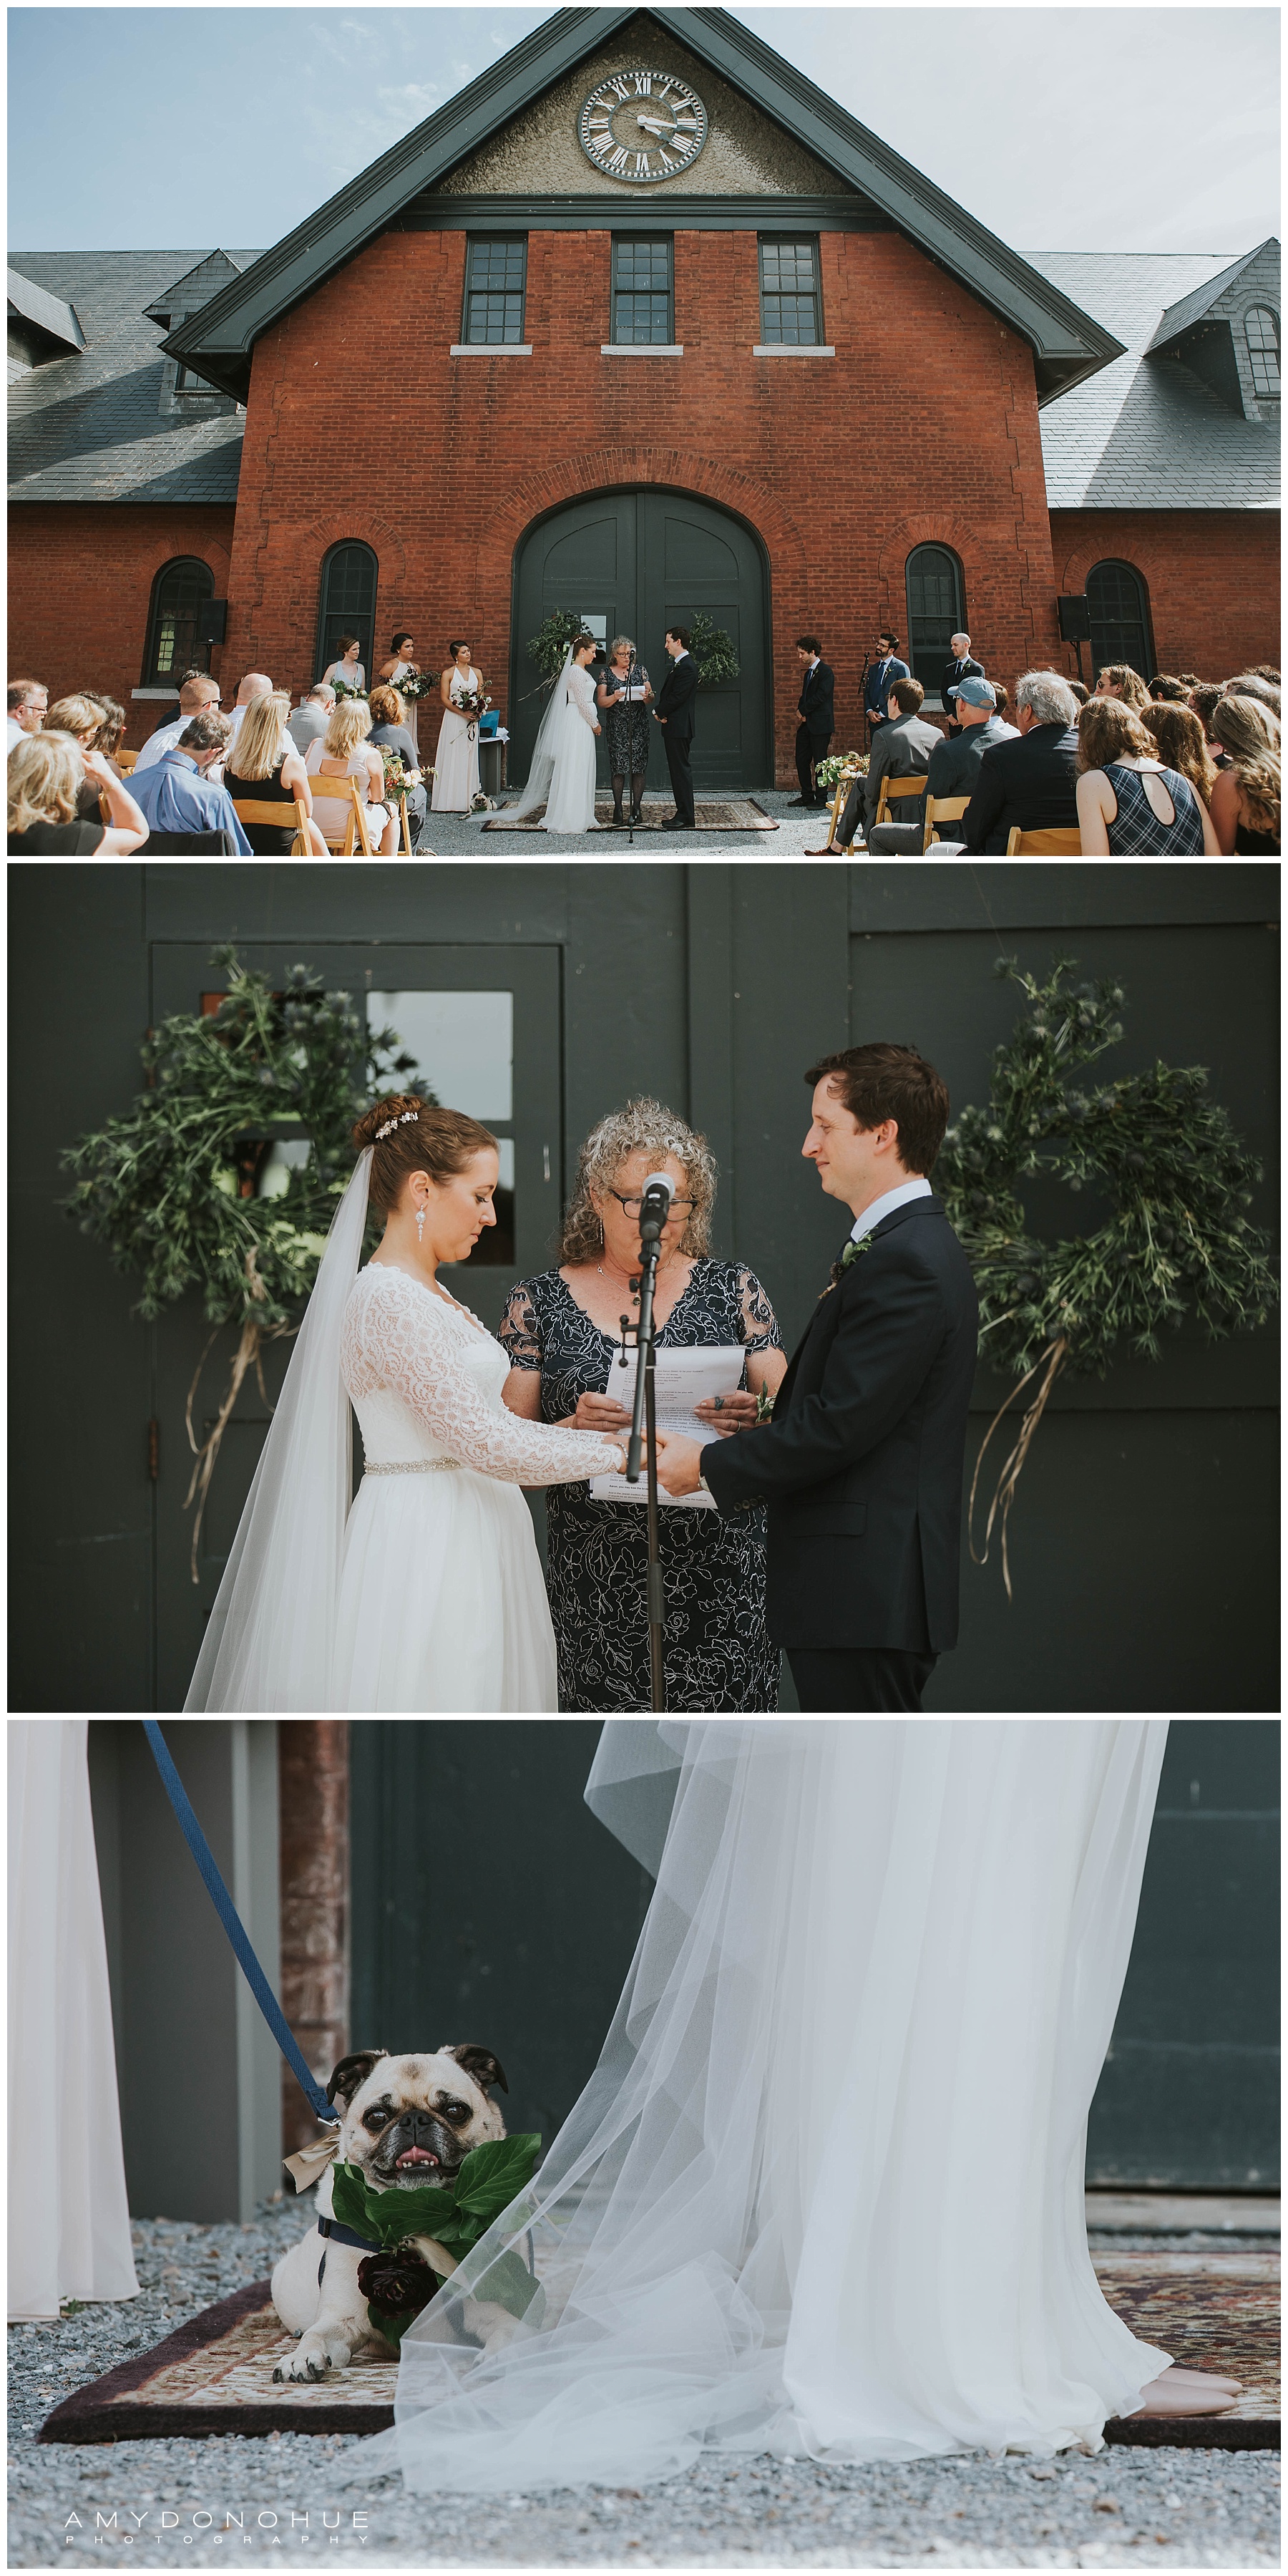 Wedding Ceremony at Shelburne Farms | Amy Donohue Photography